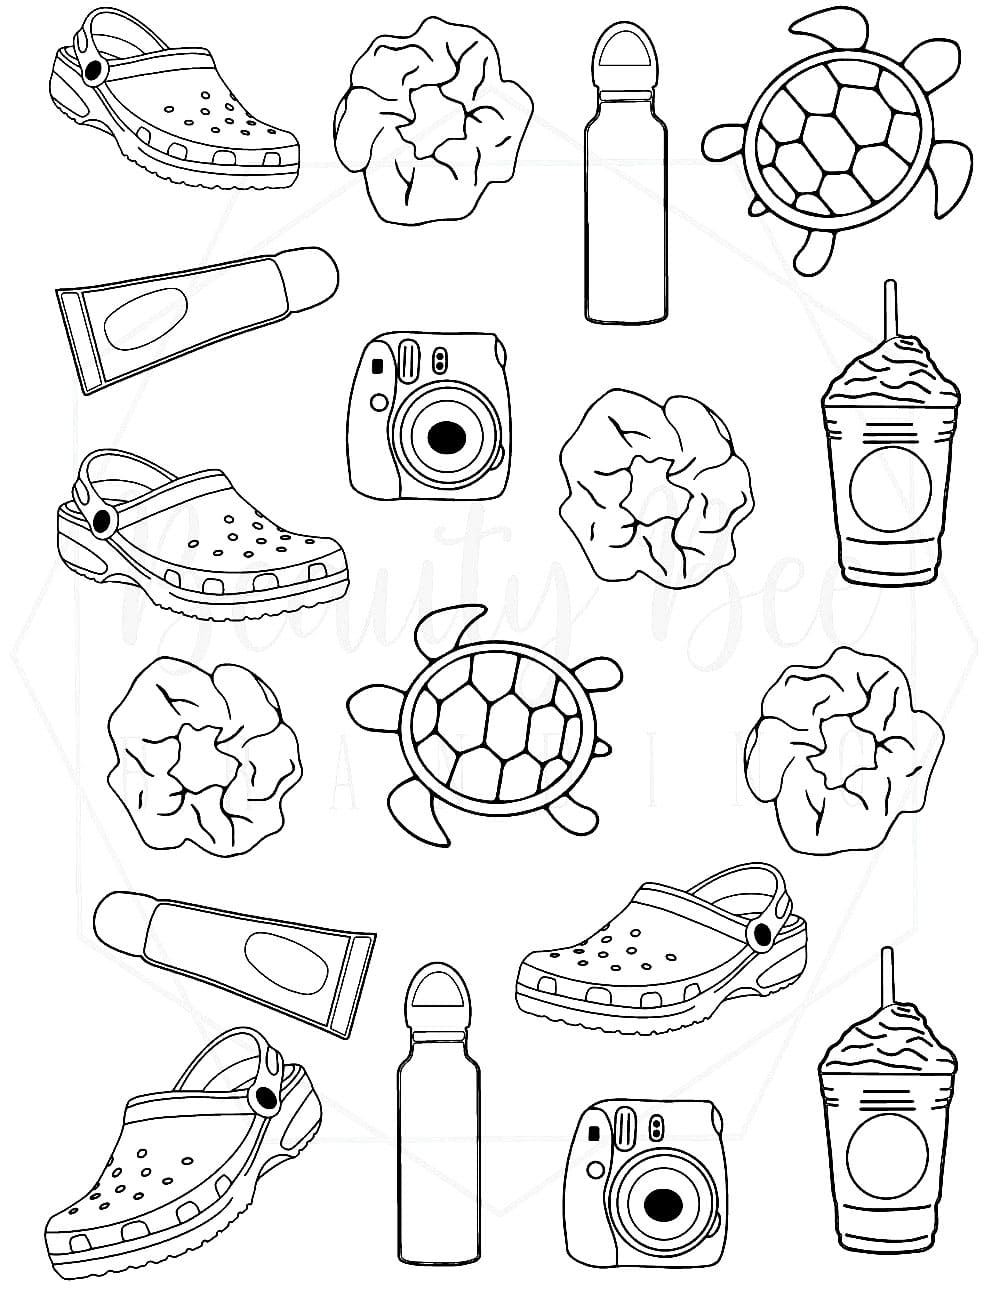 VSCO Stickers Coloring Page   Free Printable Coloring Pages for Kids